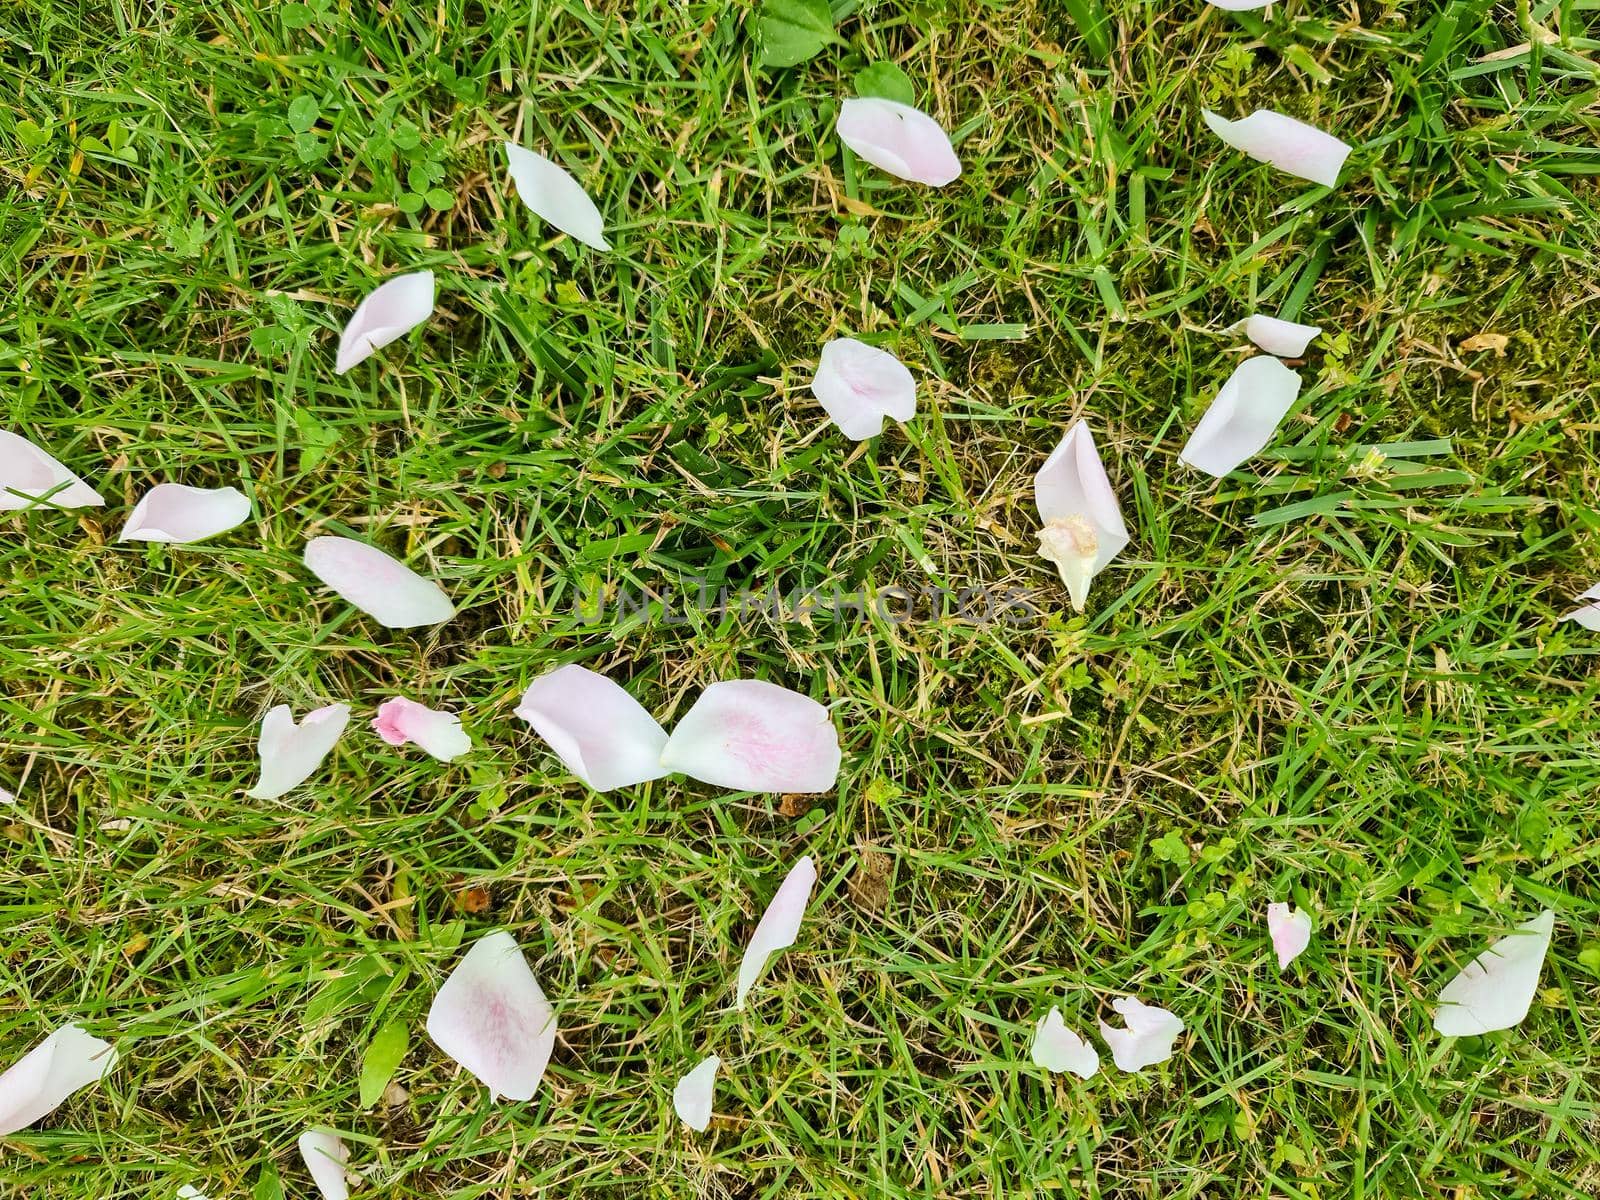 Grass surface with lots of pink rose petals